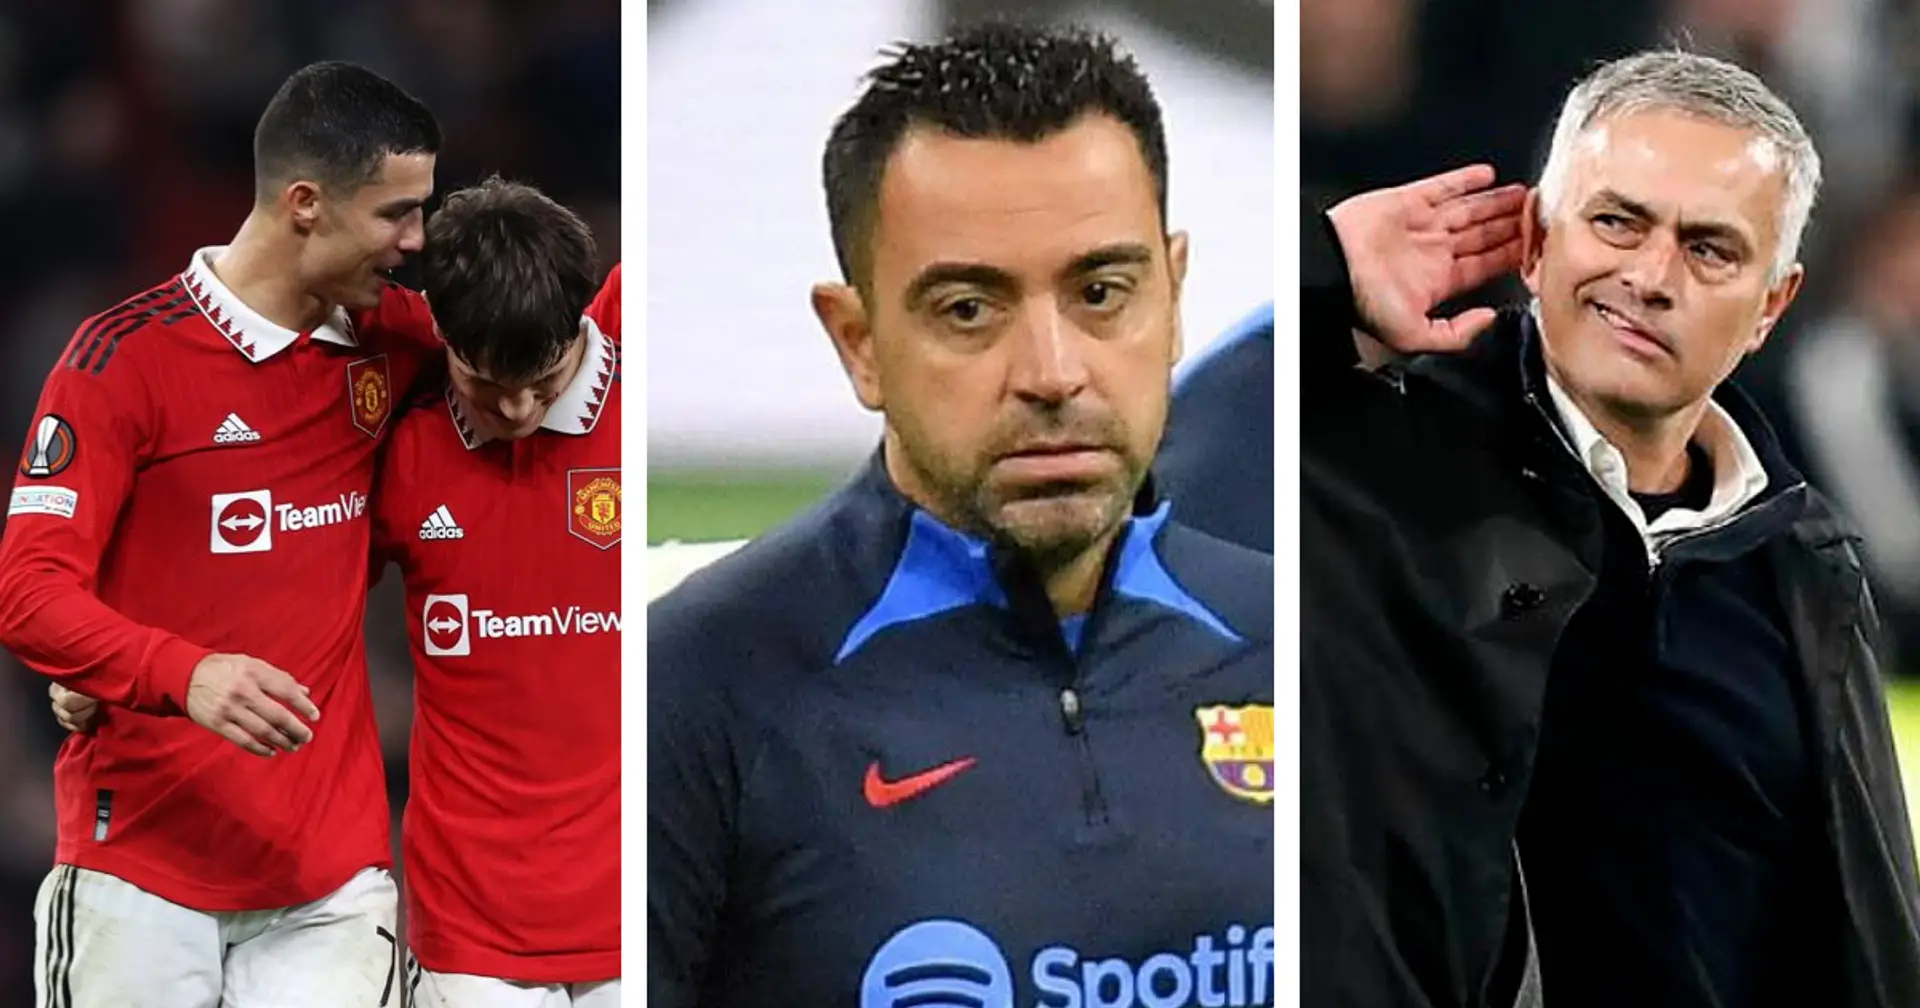 Man United and 7 more: Possible rivals for Barca in Europa League revealed